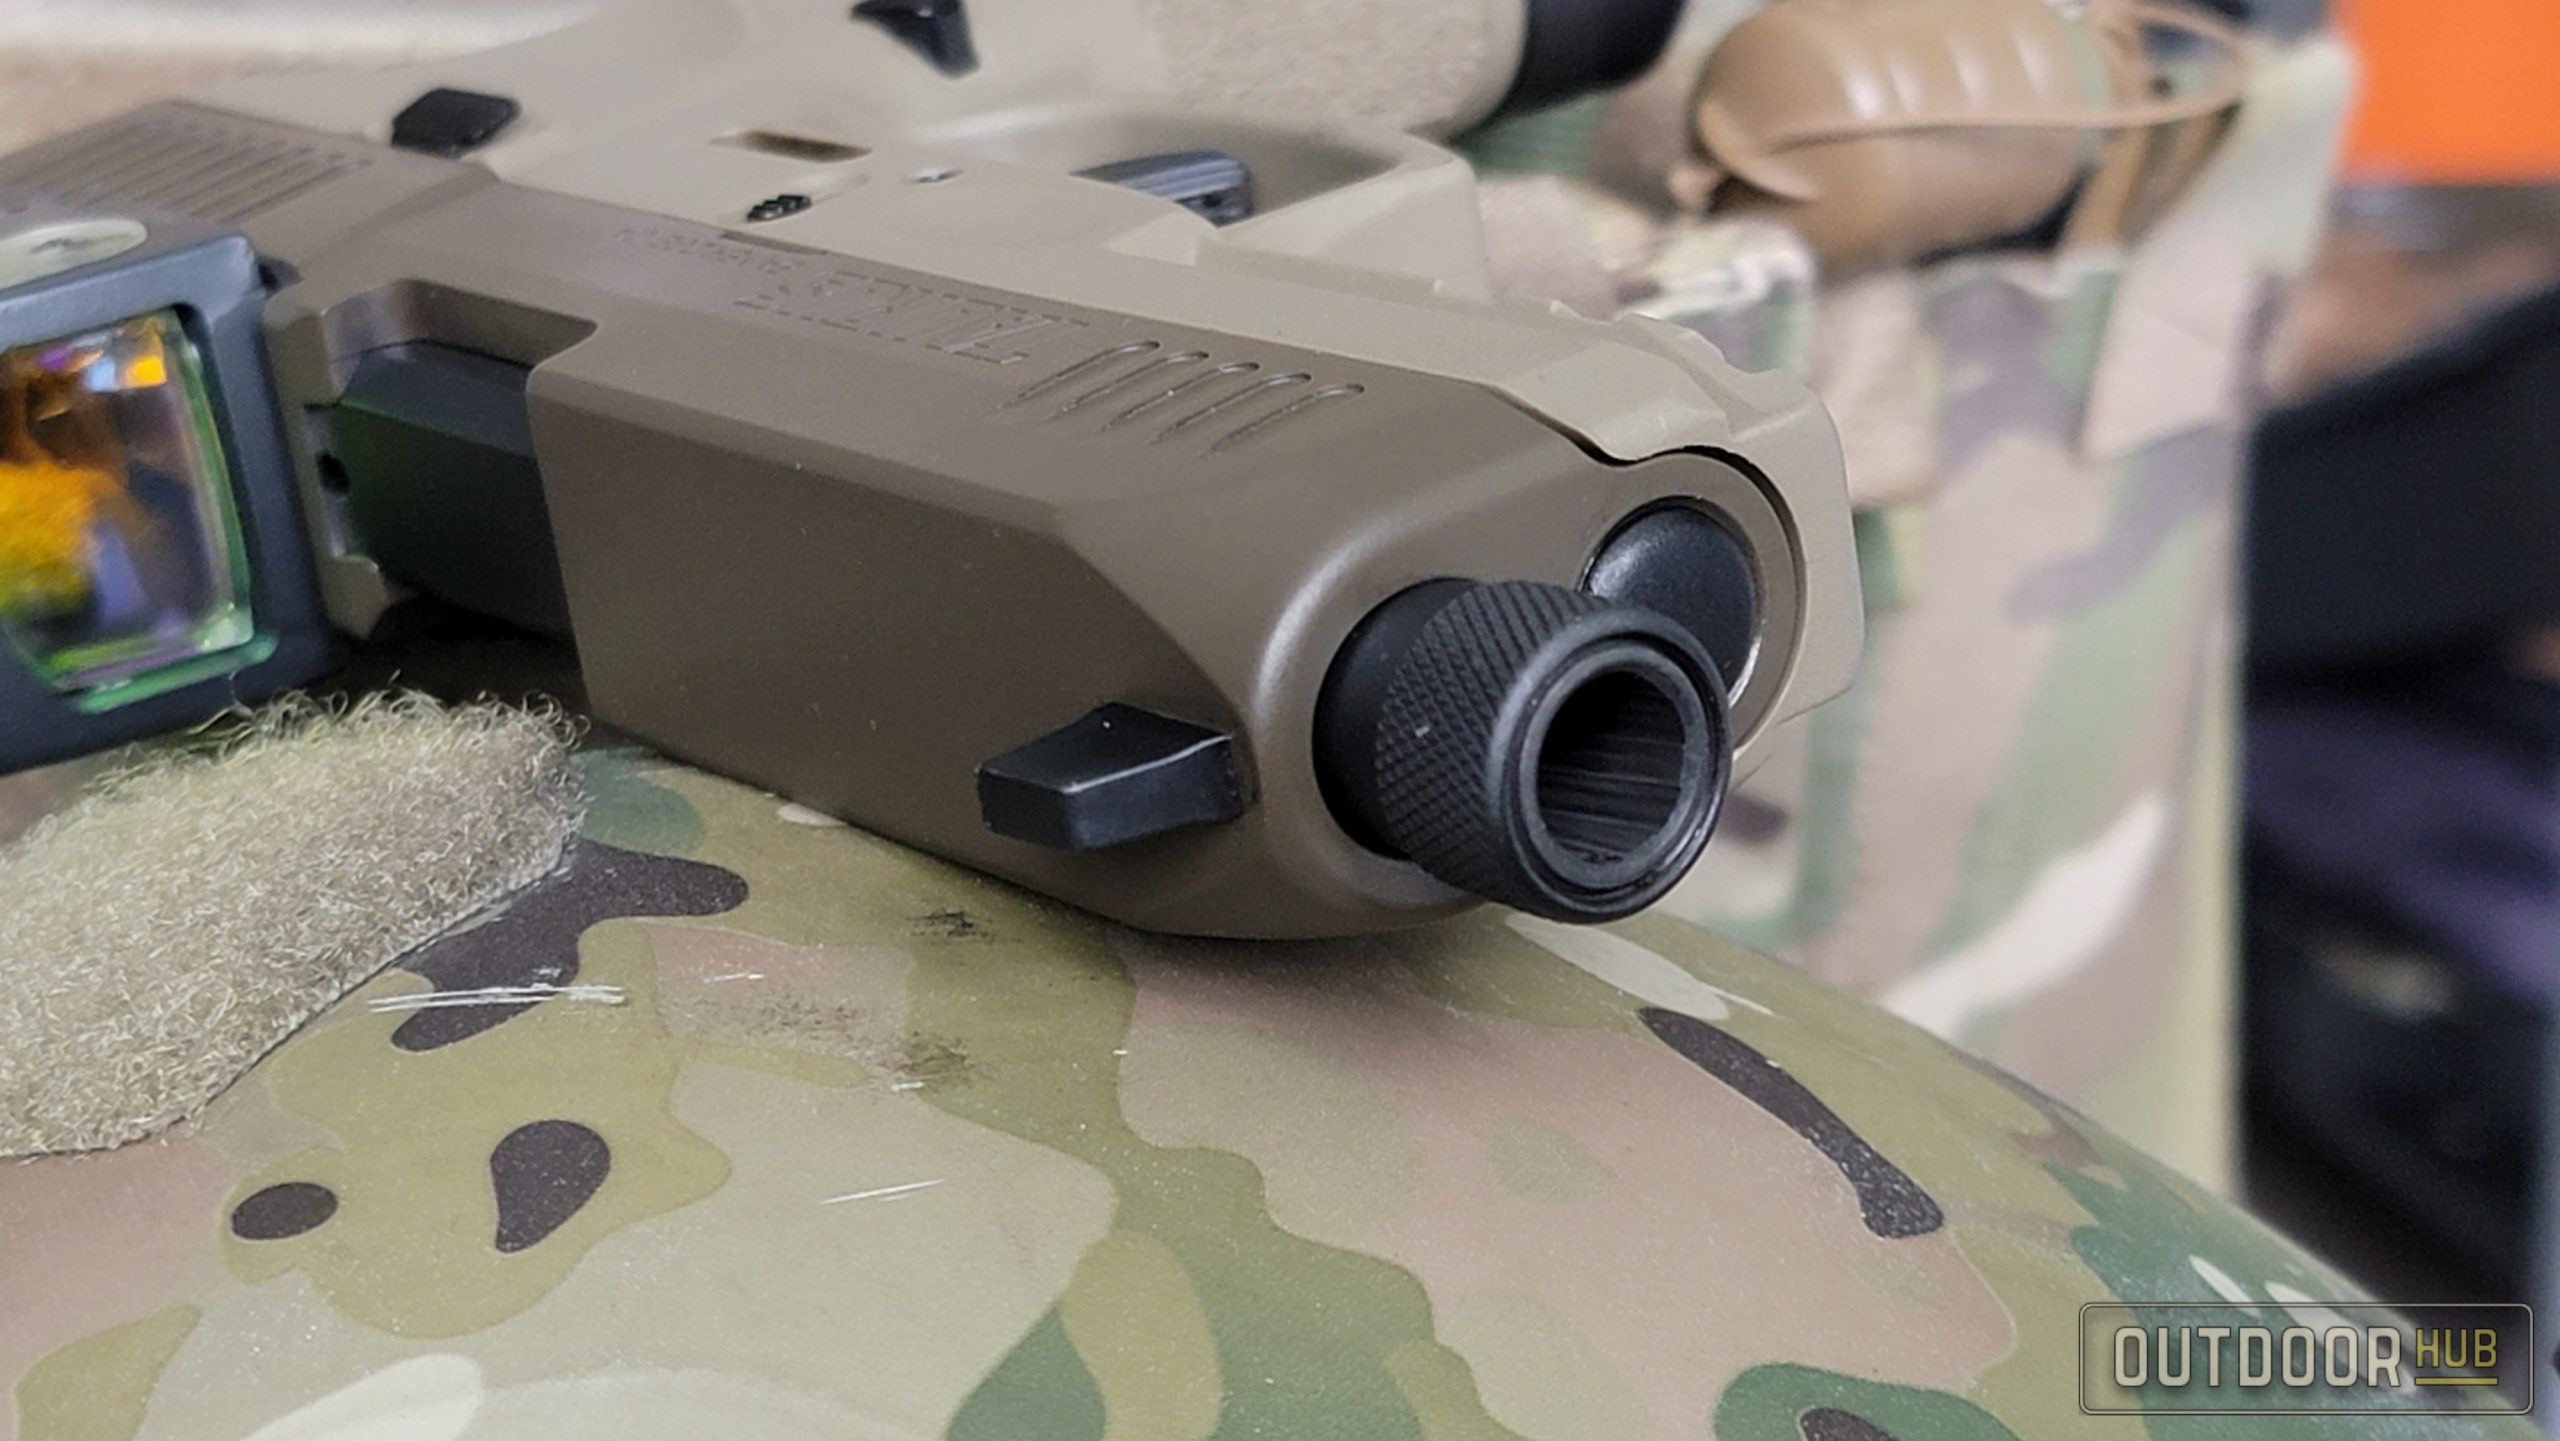 The G3 Goes Tactical: The New G3 Tactical 9mm Suppressor Ready Pistol